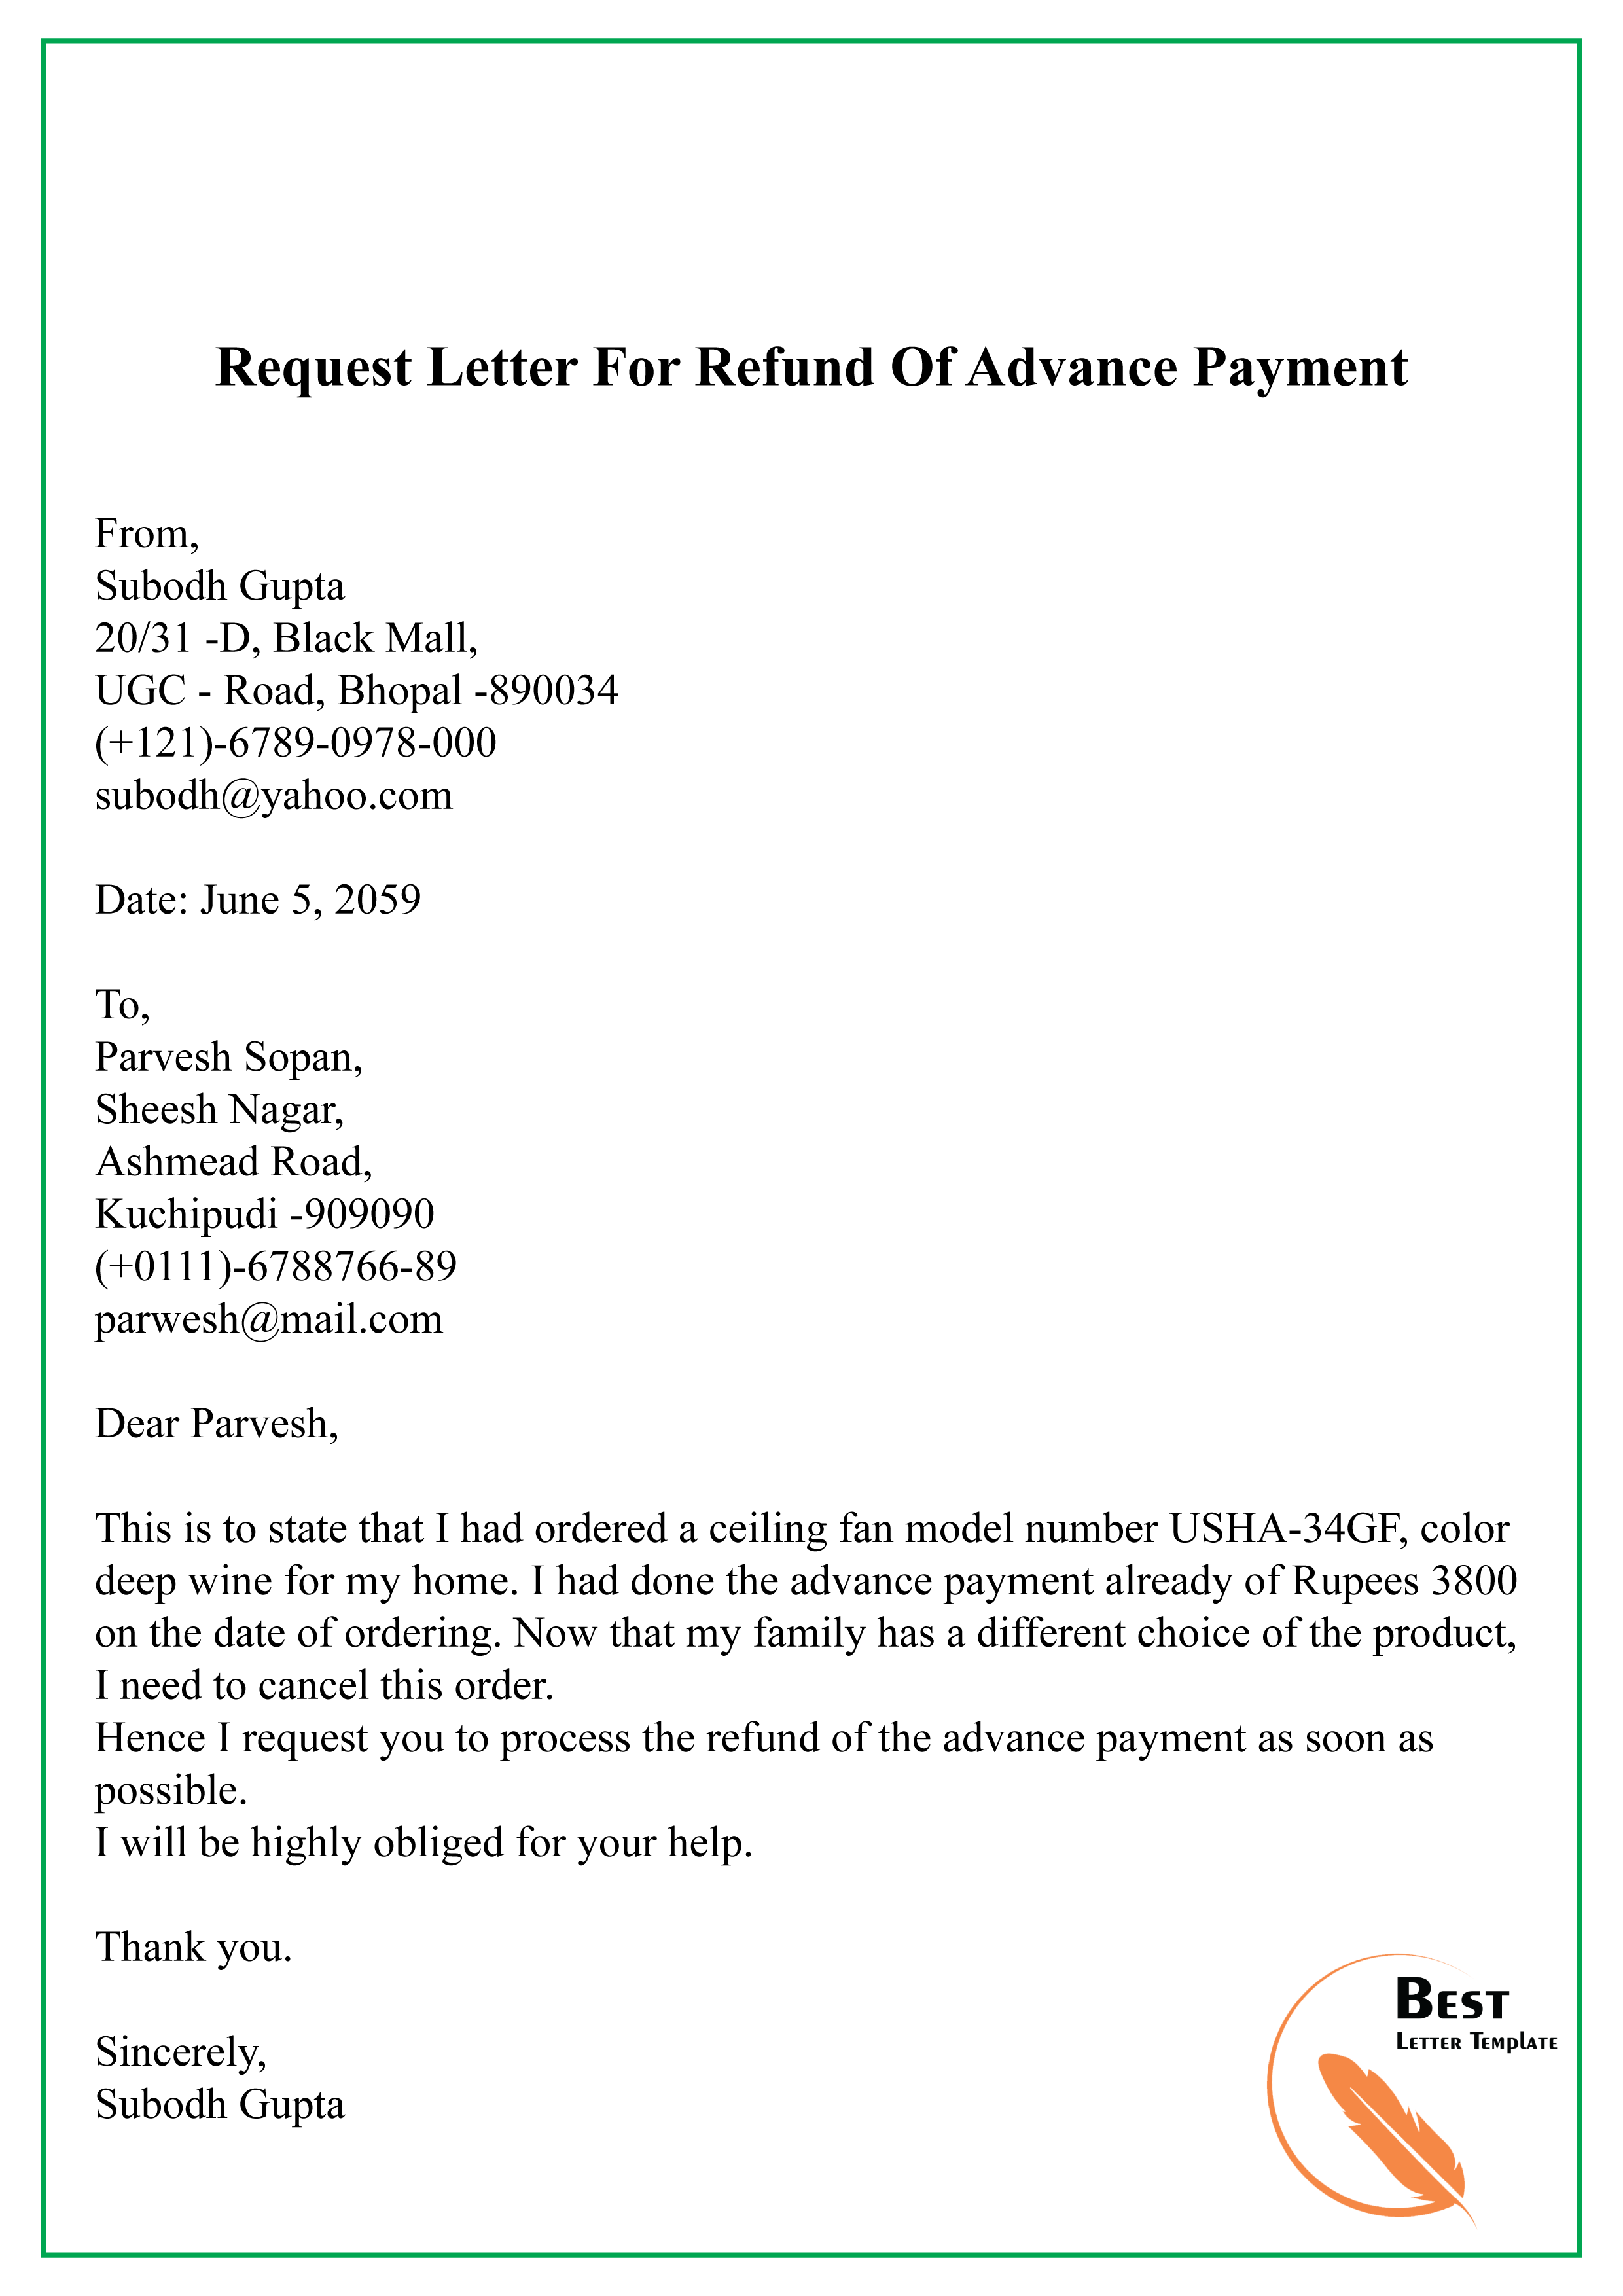 how-to-write-a-refund-request-letter-01-best-letter-template-images